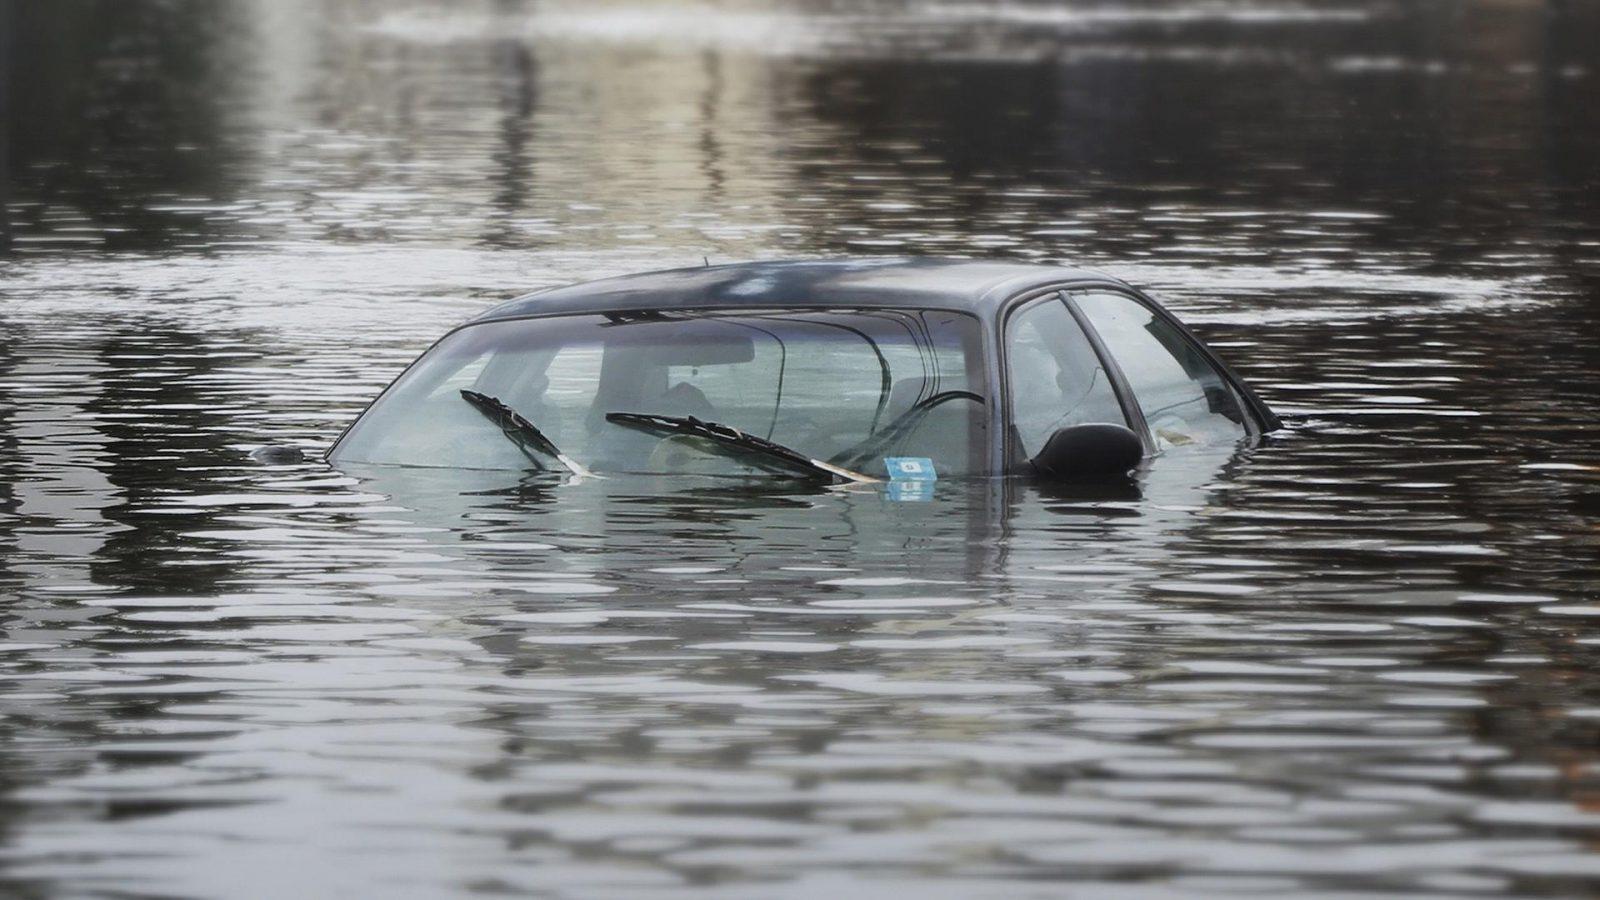 Do Car Doors Jam Underwater? And How to Survive a Submerging Car?